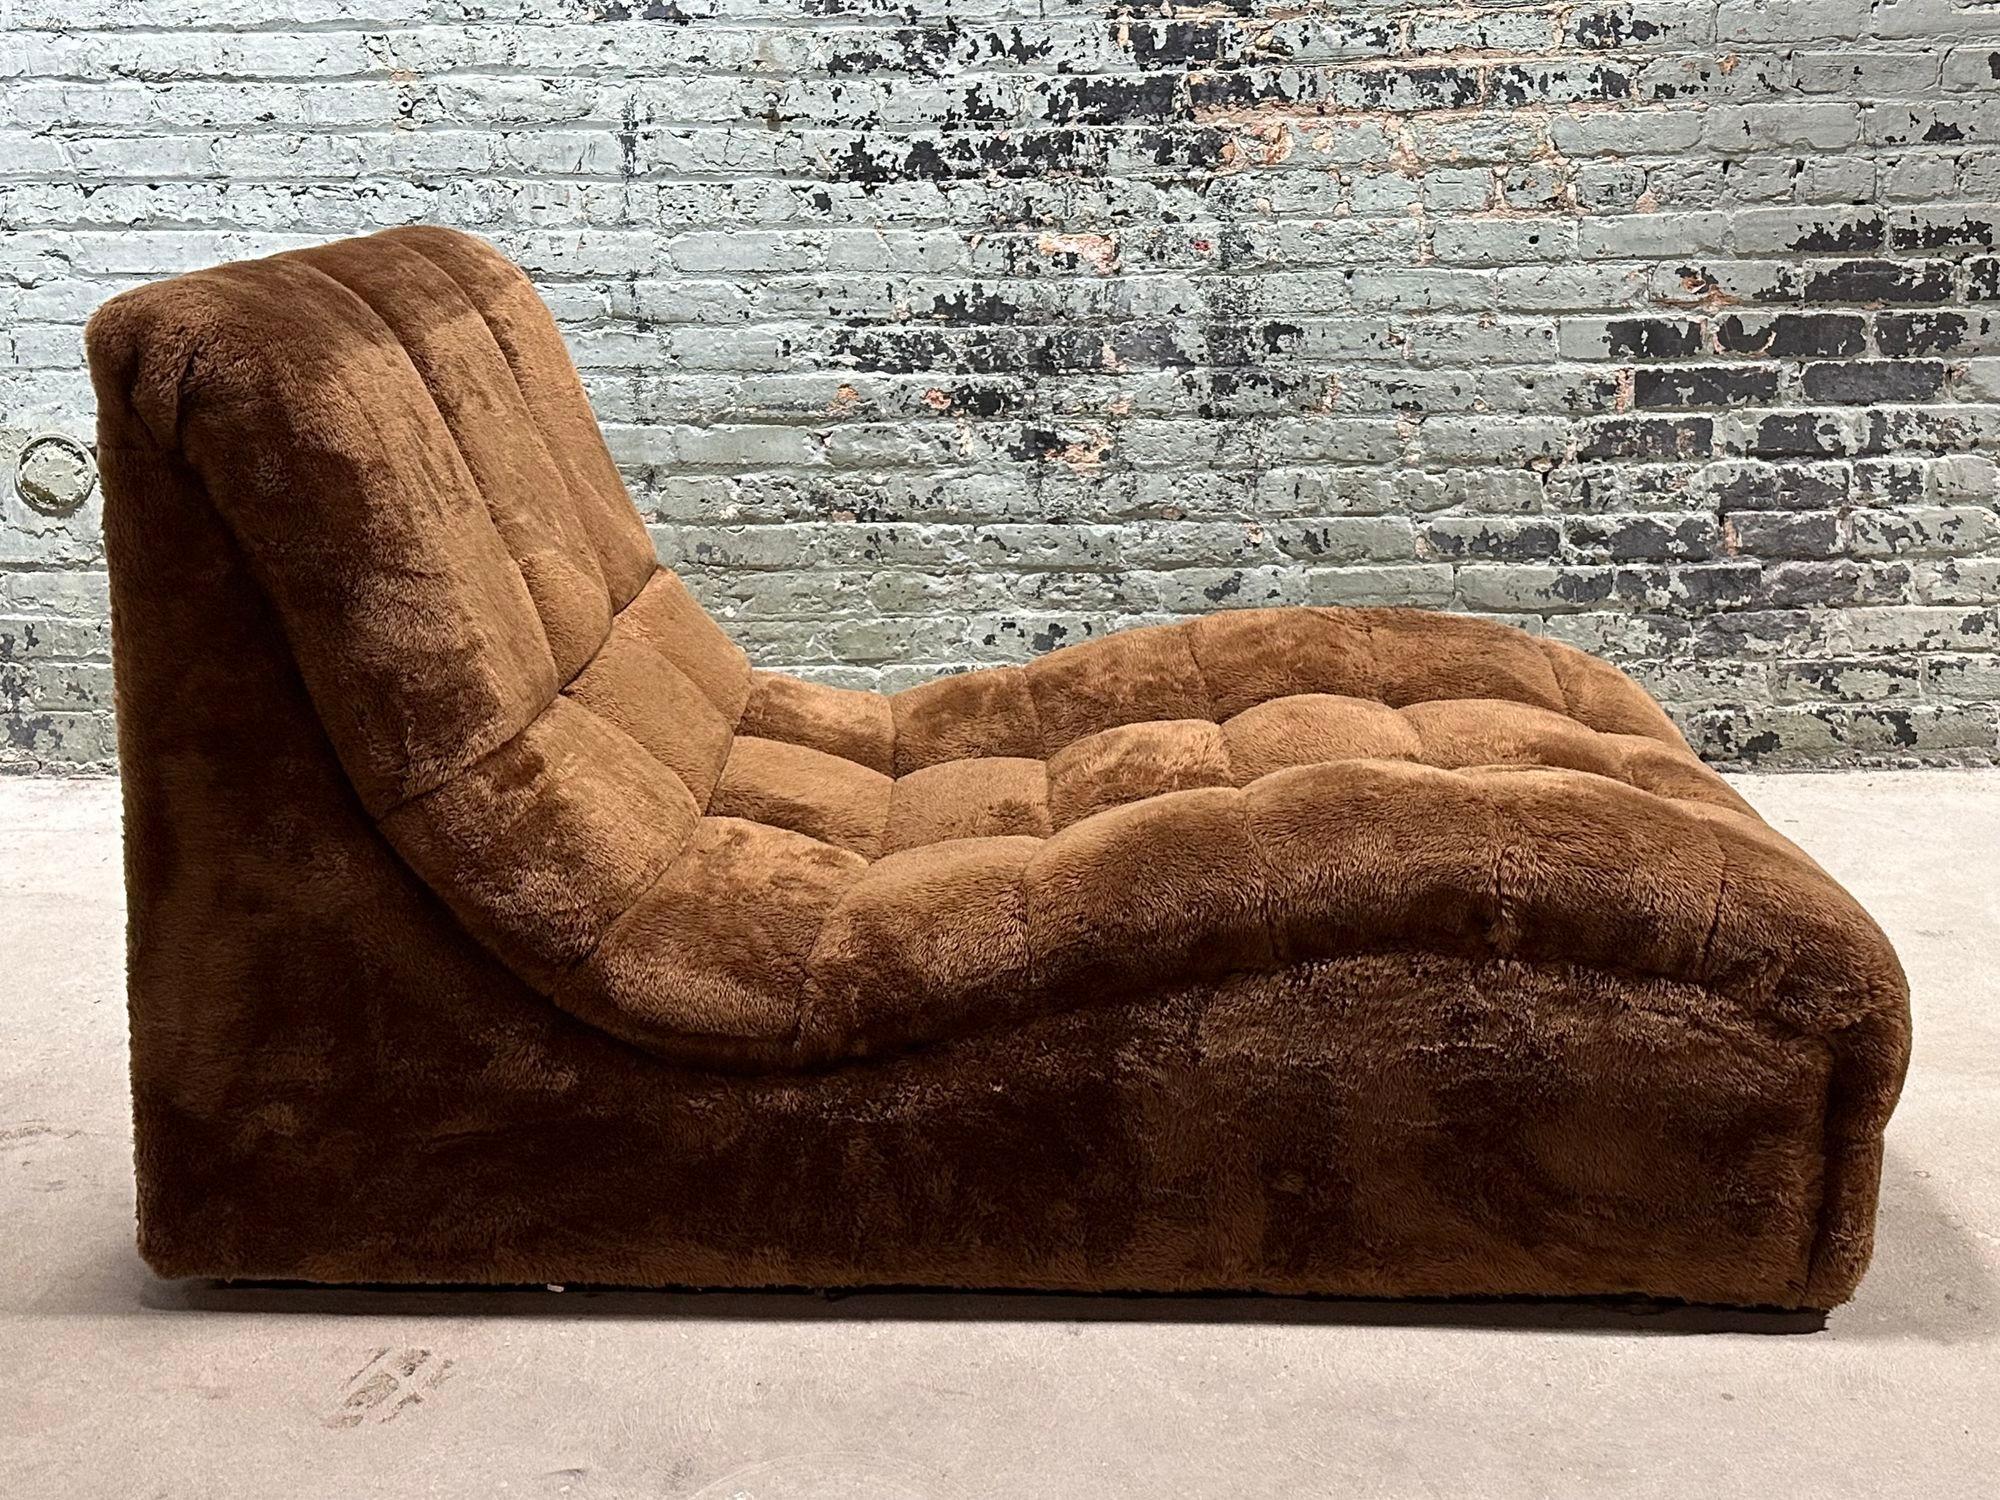 Wave Chaise Lounge Chair attributed to Adrian Pearsall, 1960. Original upholstery.